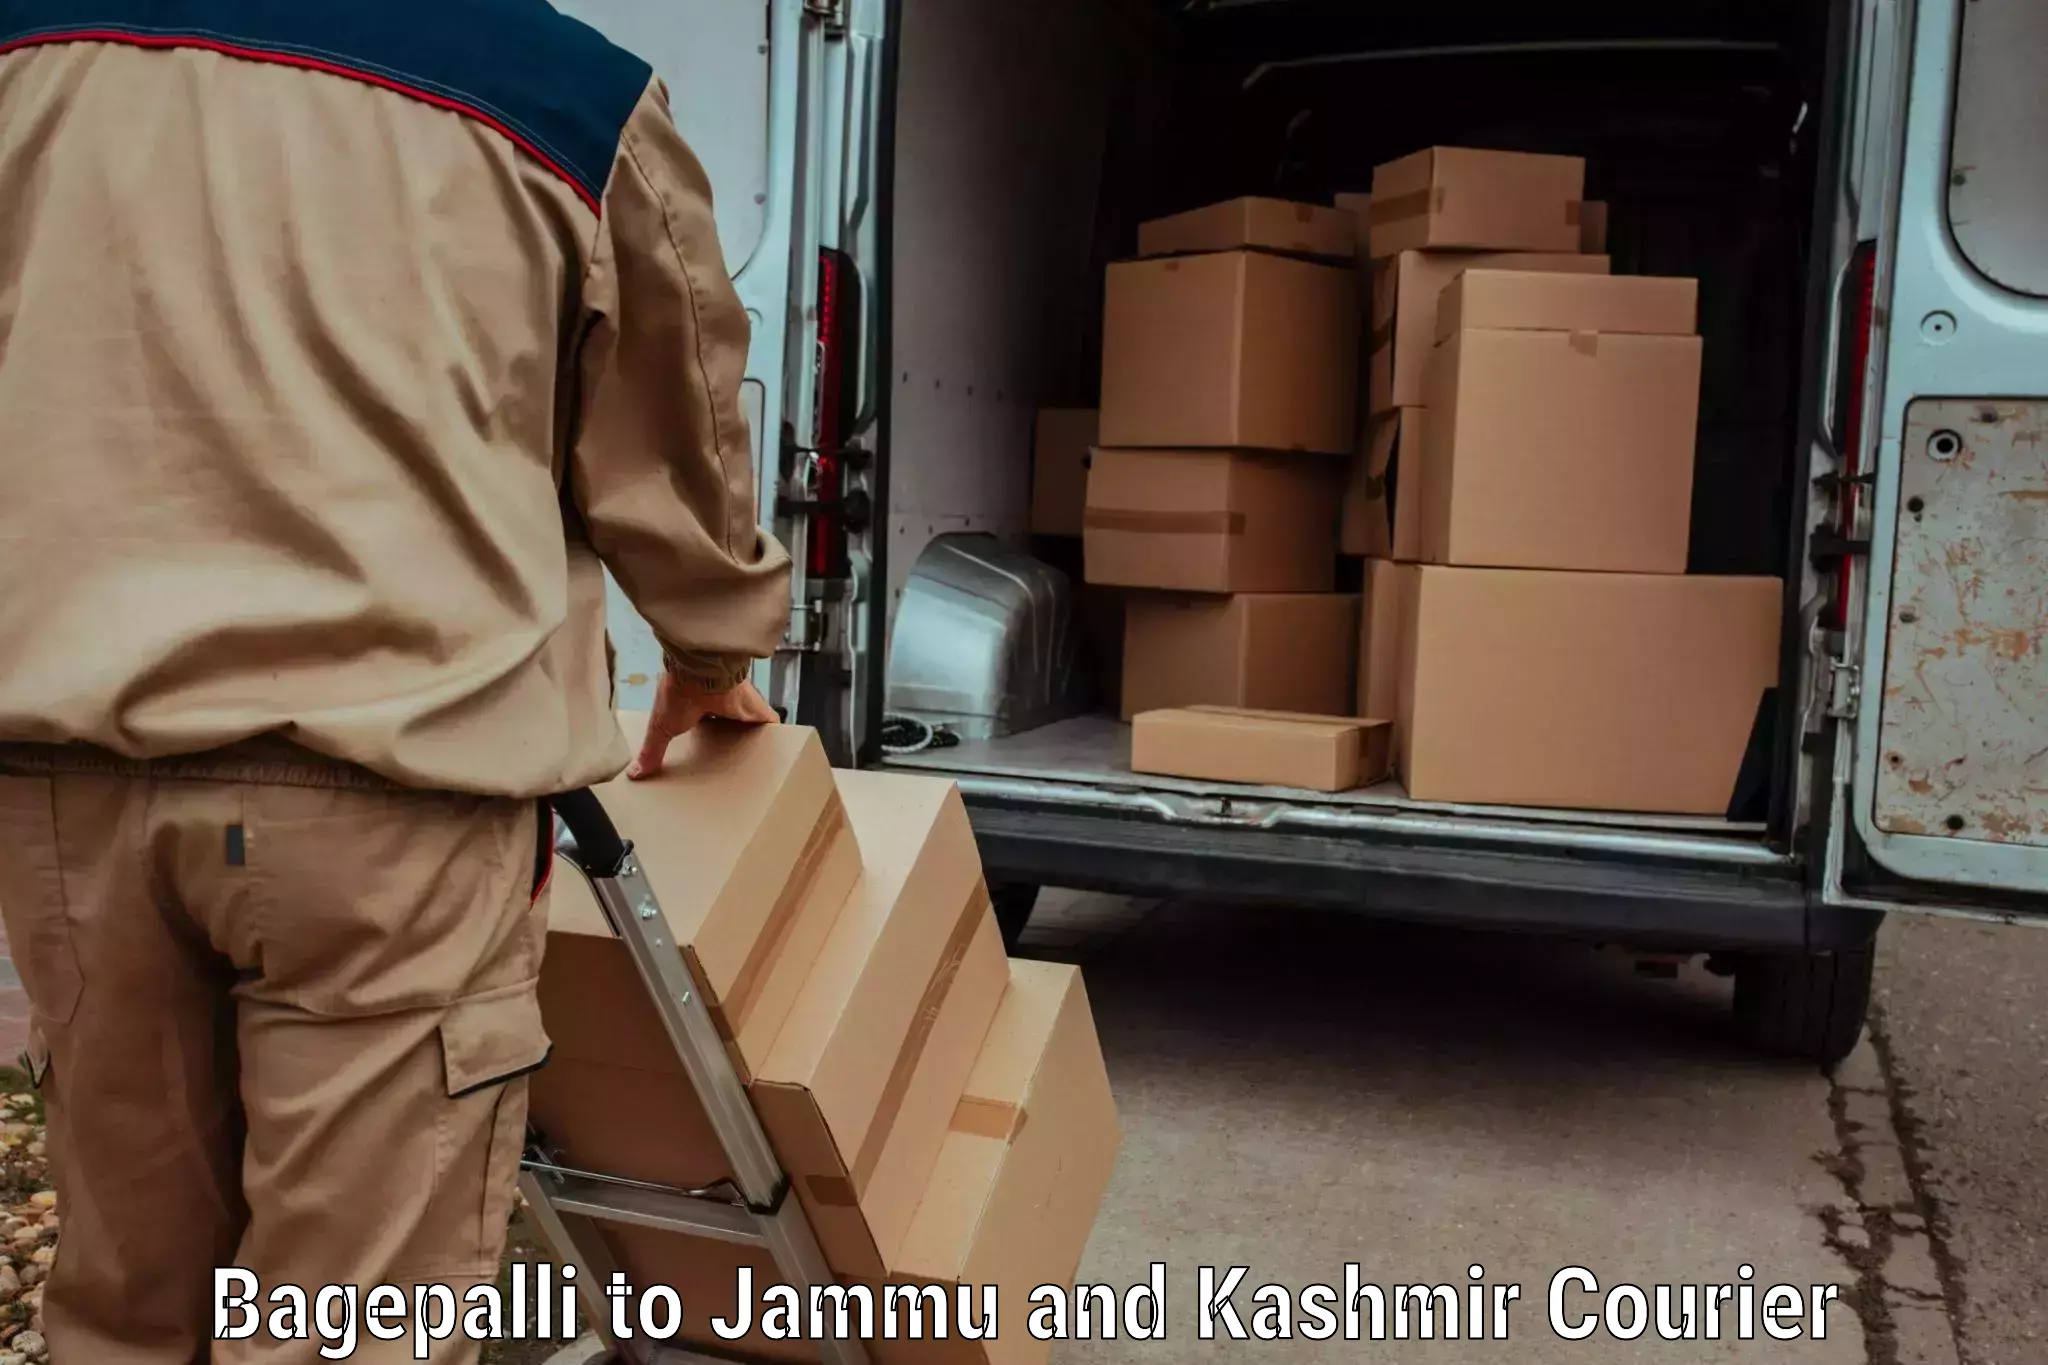 Multi-national courier services Bagepalli to Jammu